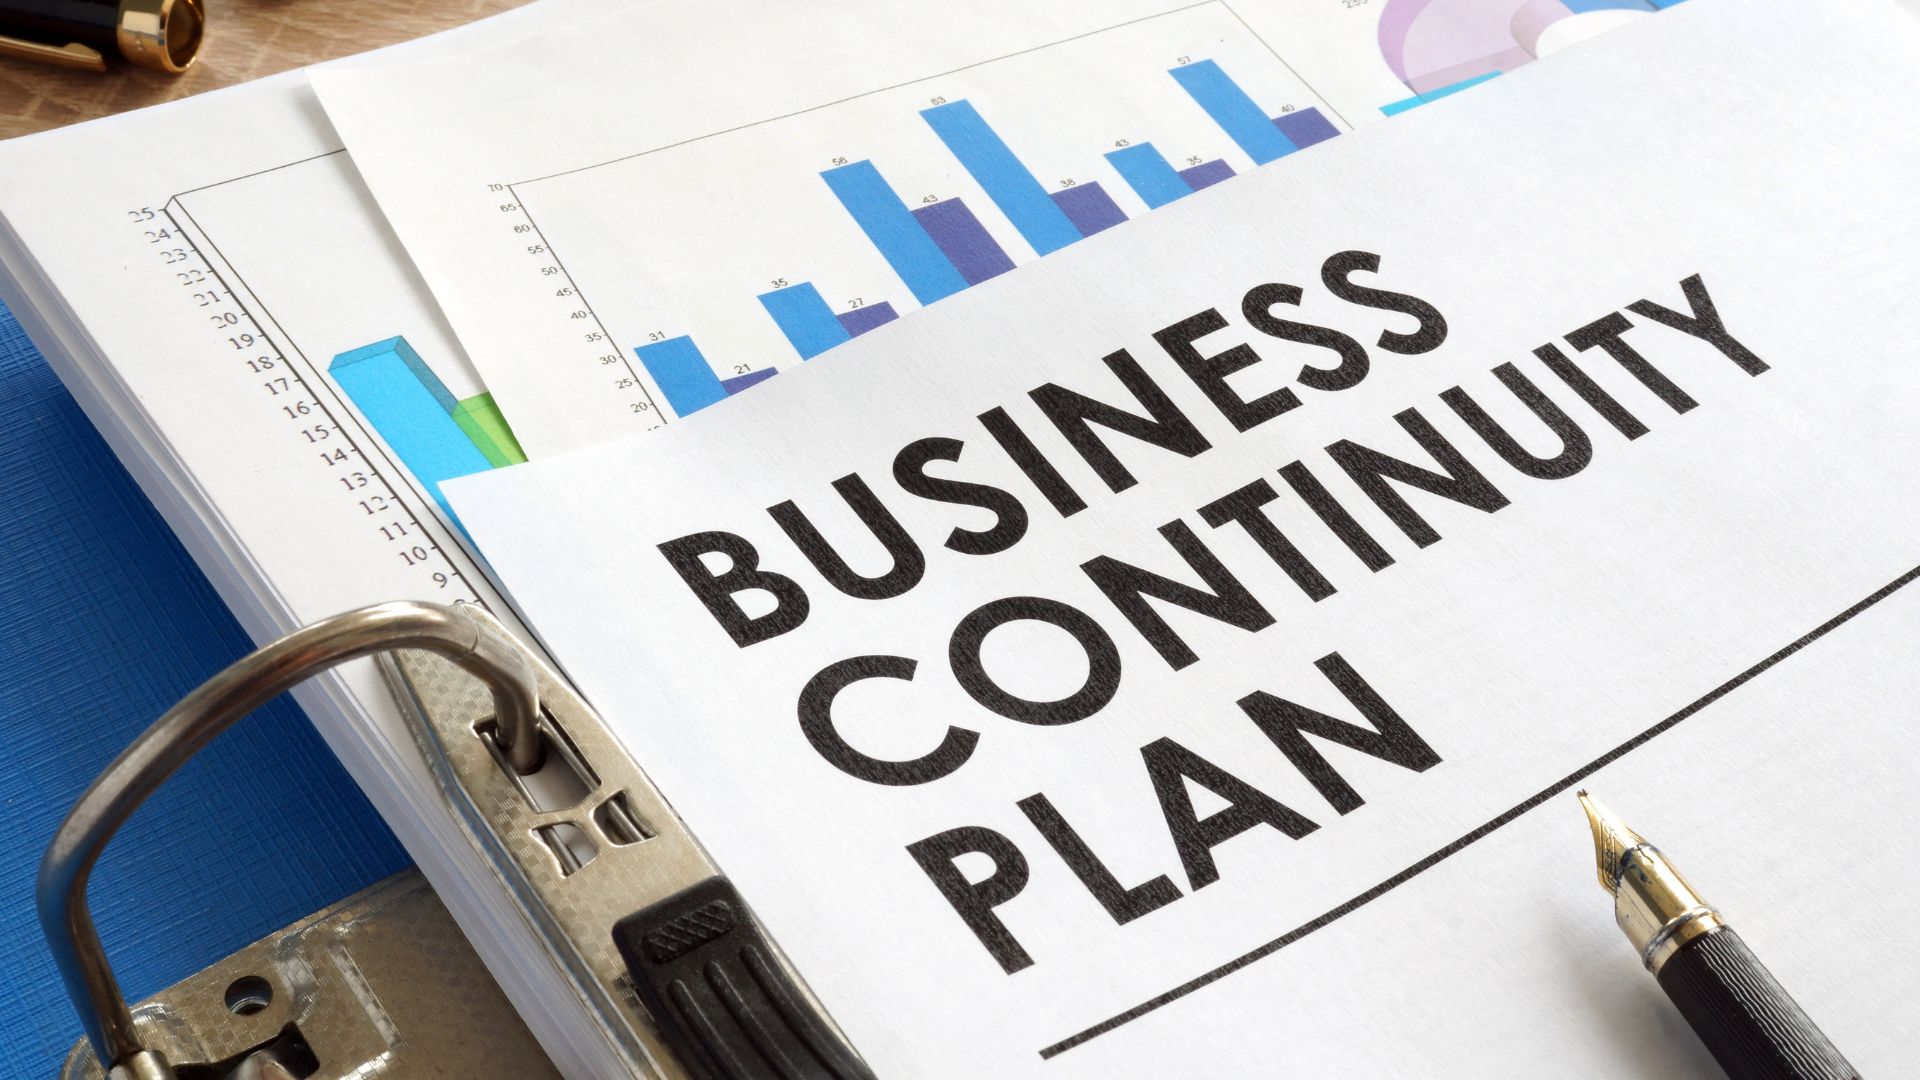 business continuity plan